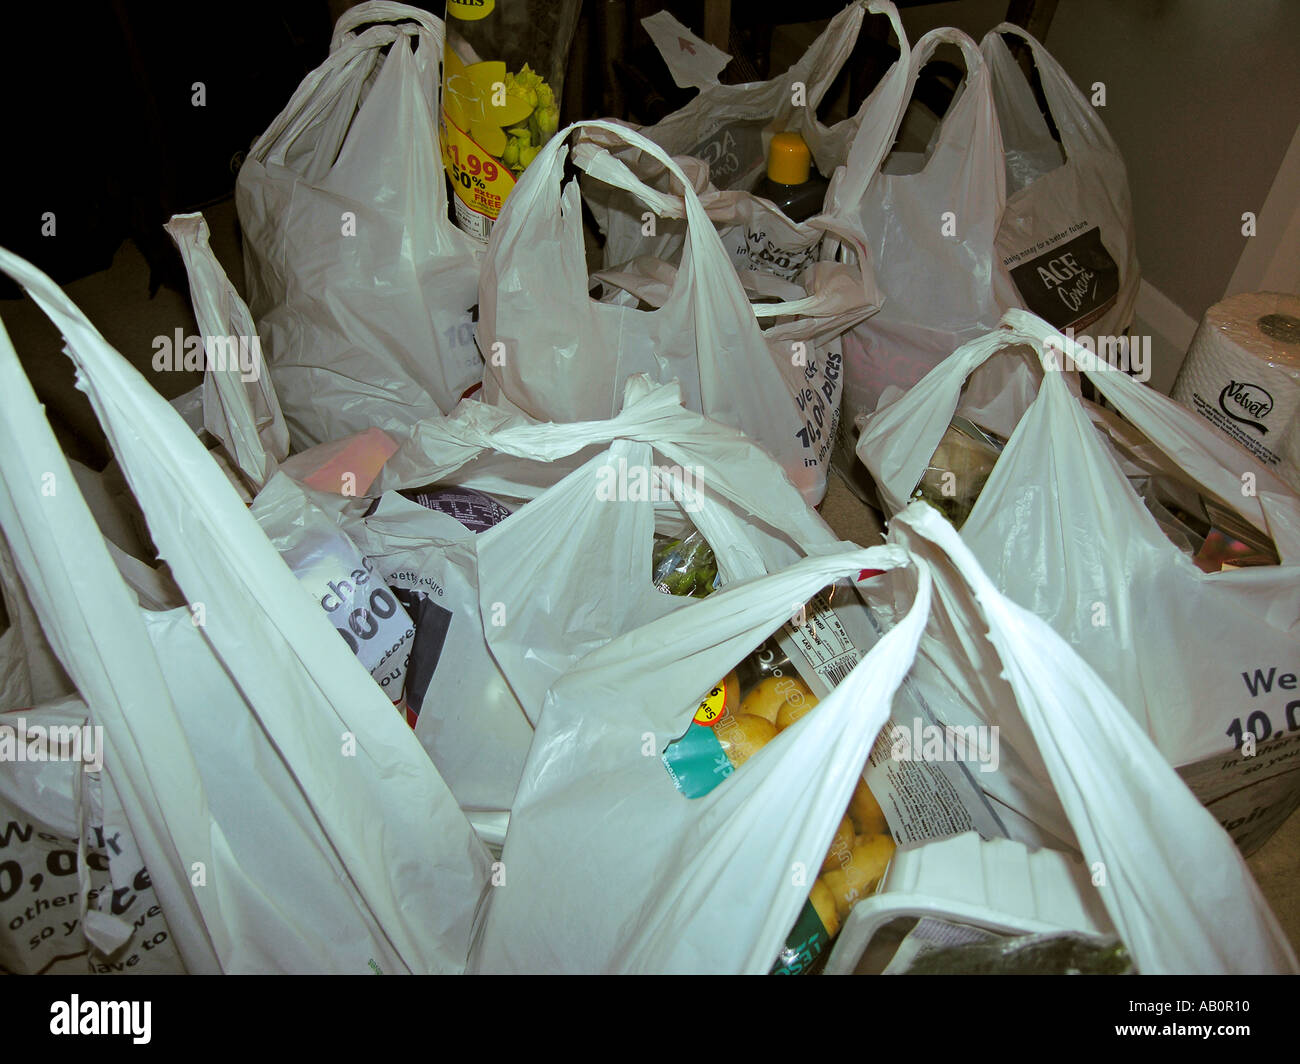 The weekly shop carrier bags from Supermarket Stock Photo - Alamy